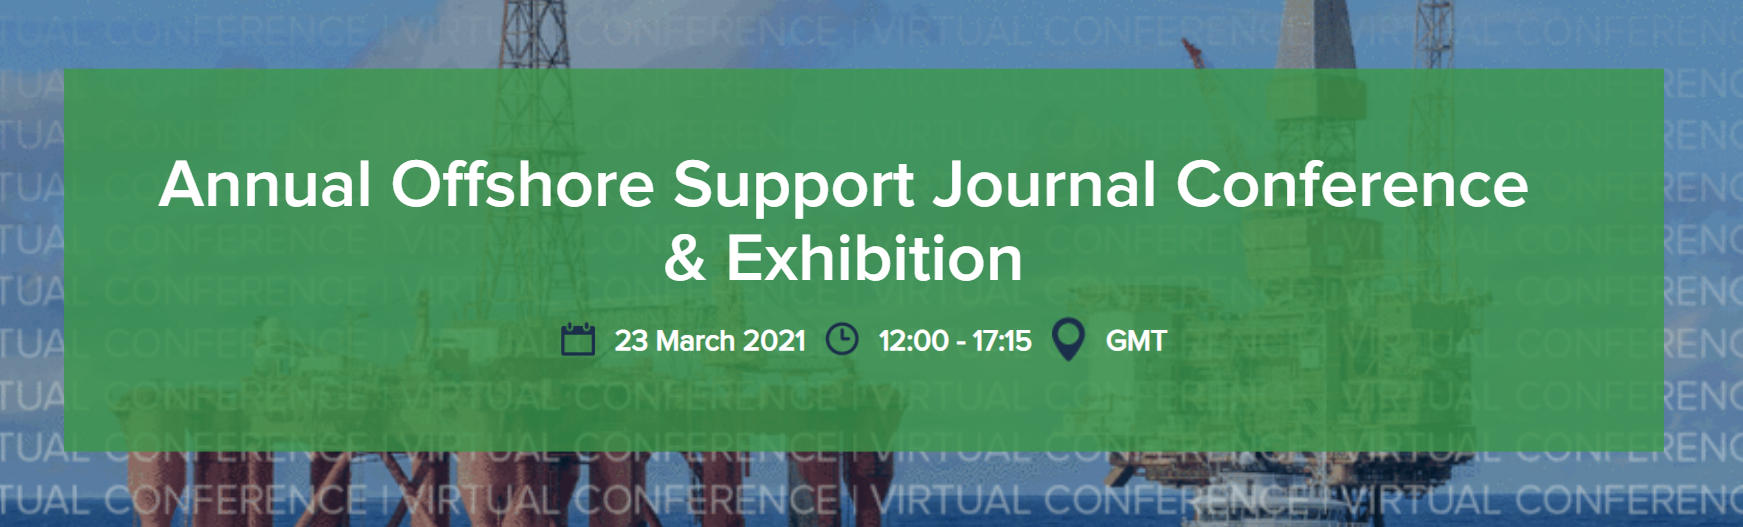 Annual Offshore Support Journal Conference & Exhibition Westwood